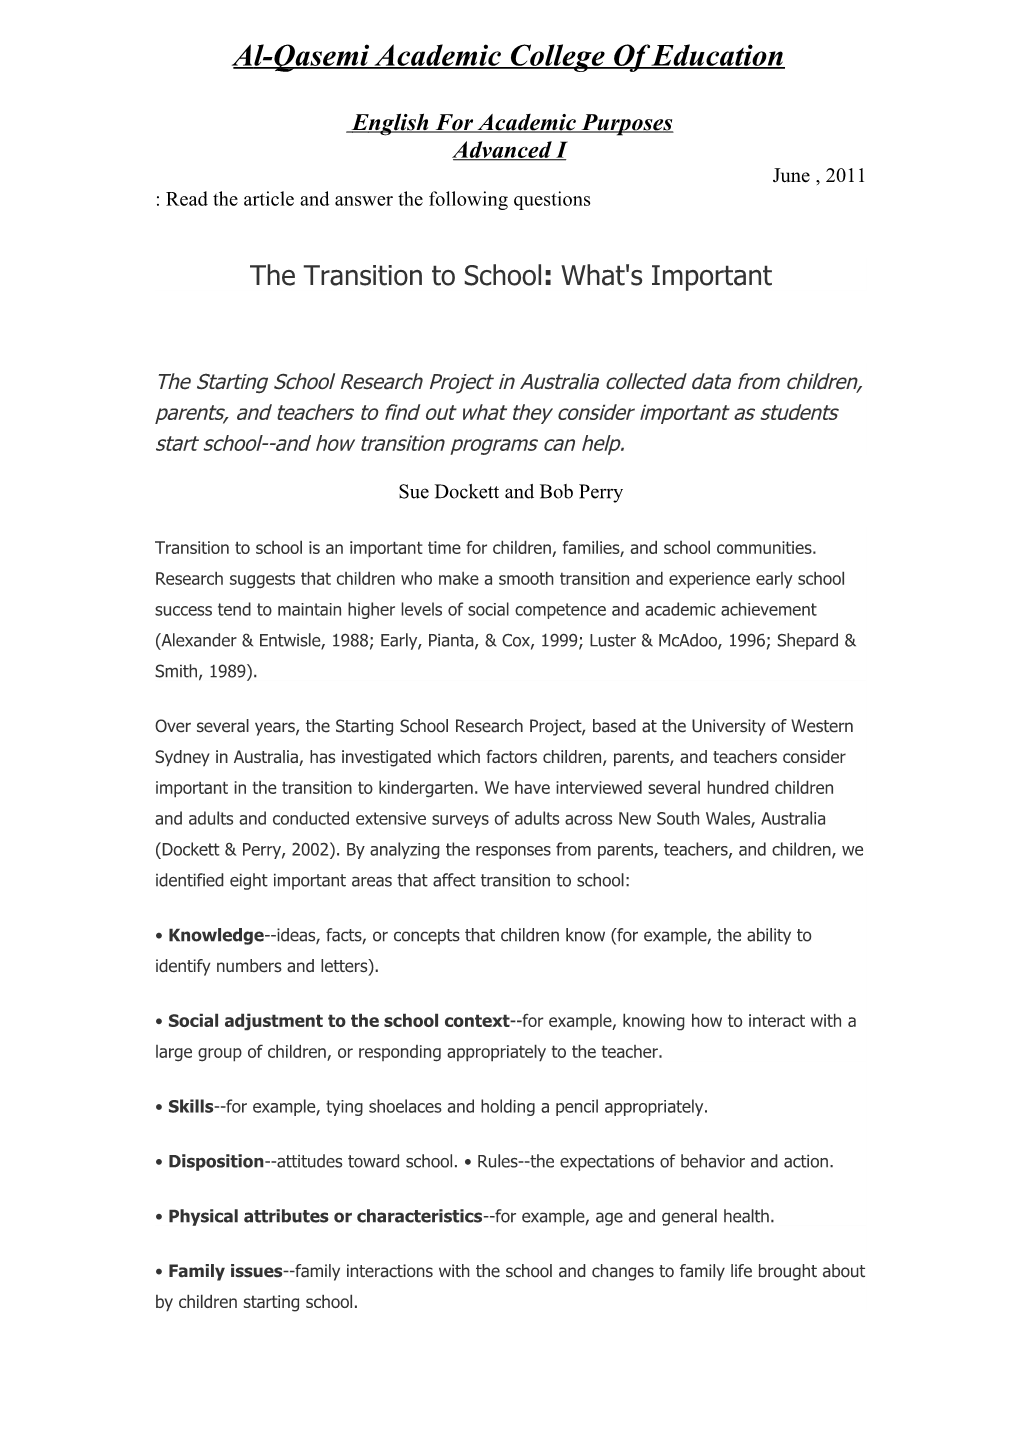 The Transition to School: What's Important